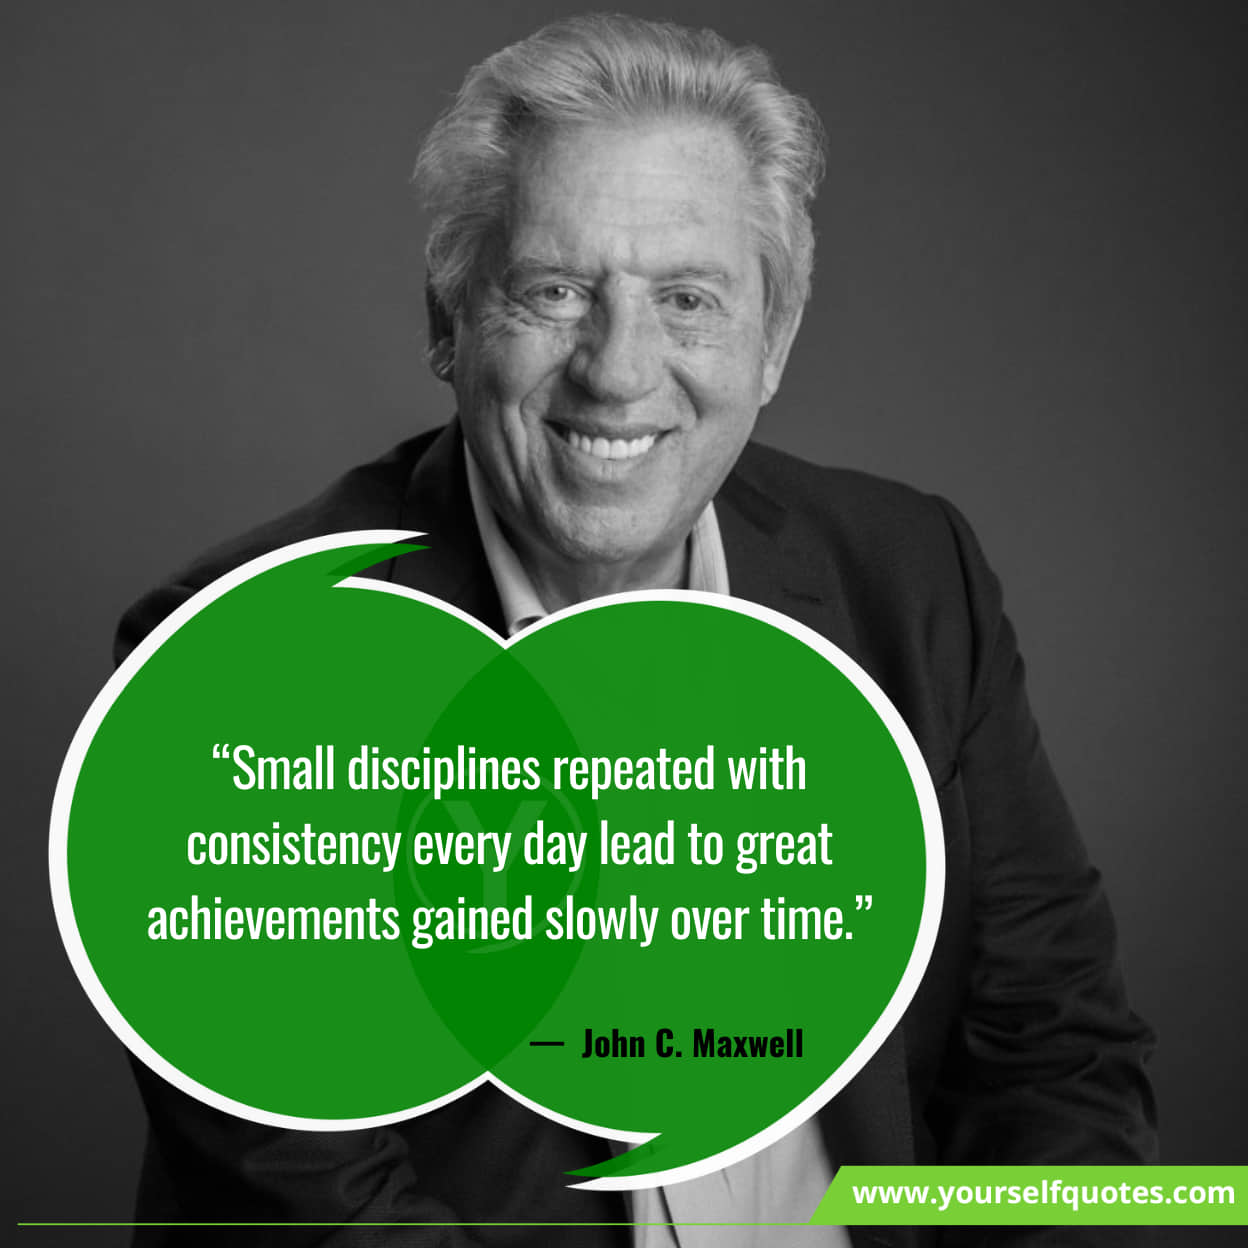 John C. Maxwell Quotes About Discipline